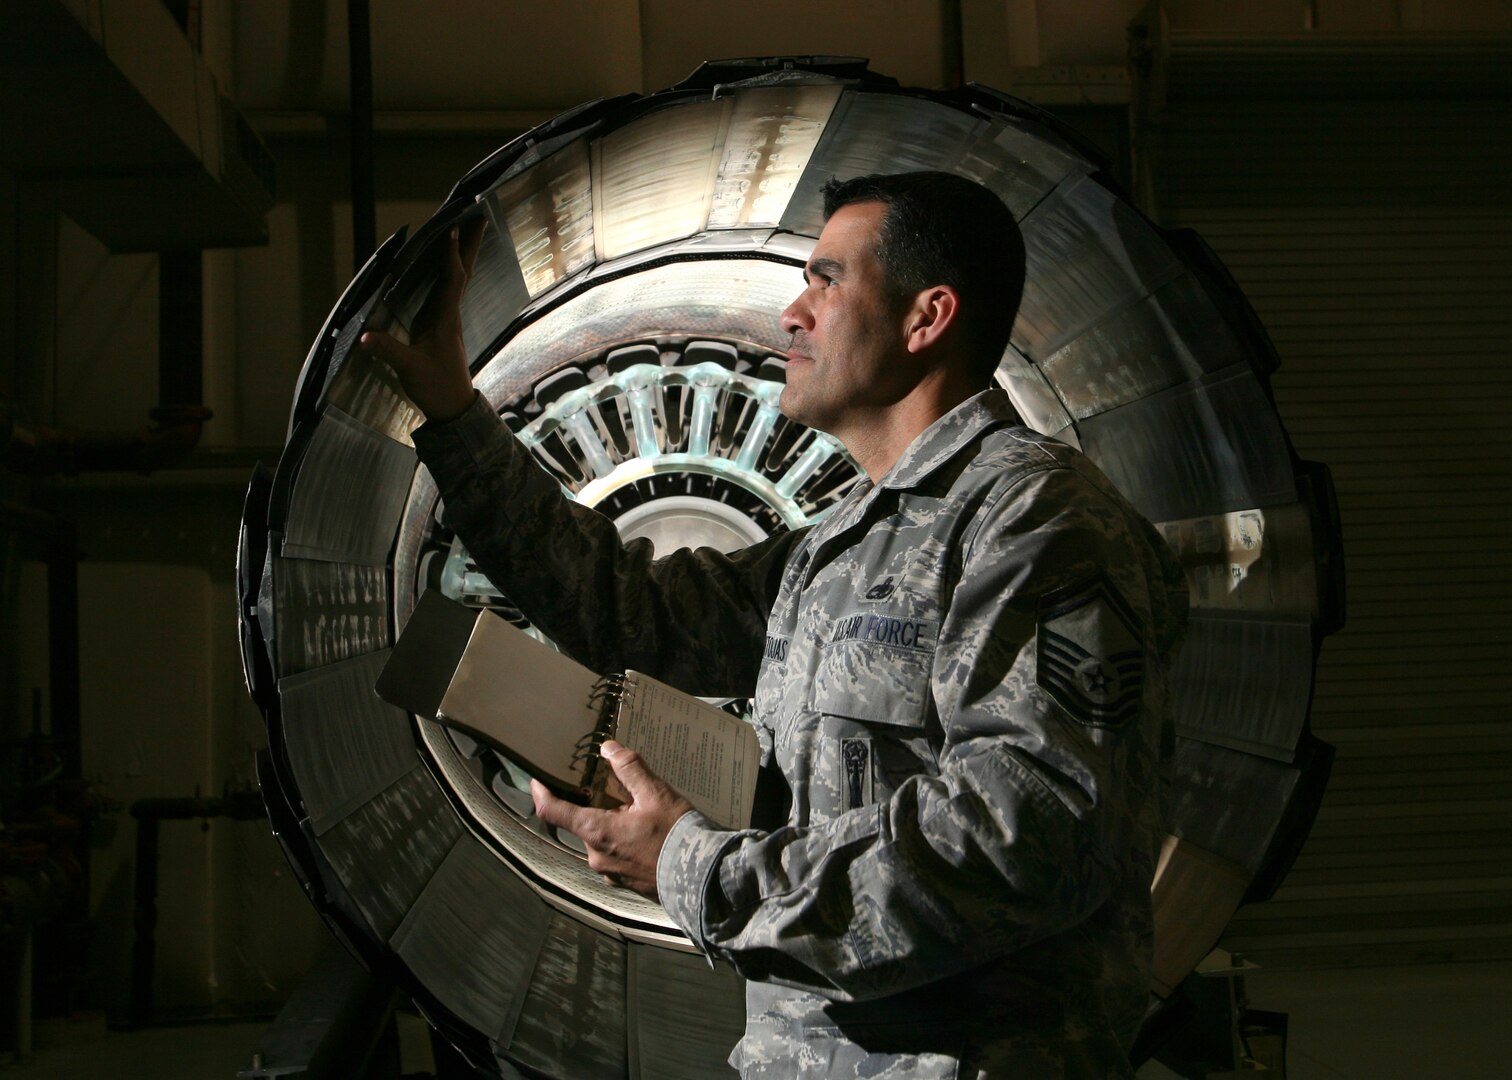 Senior Master Sgt. David Pantojas, Inter-American Air Forces Academy, performs validation checks Jan. 25 to ensure aircraft systems are ready for the upcoming maintenance training courses taught at IAAFA. Instructors at IAAFA provide training to 21 Latin American nations on 20 different aircraft maintenance related courses. (U.S. Air Force photo/Robbin Cresswell)